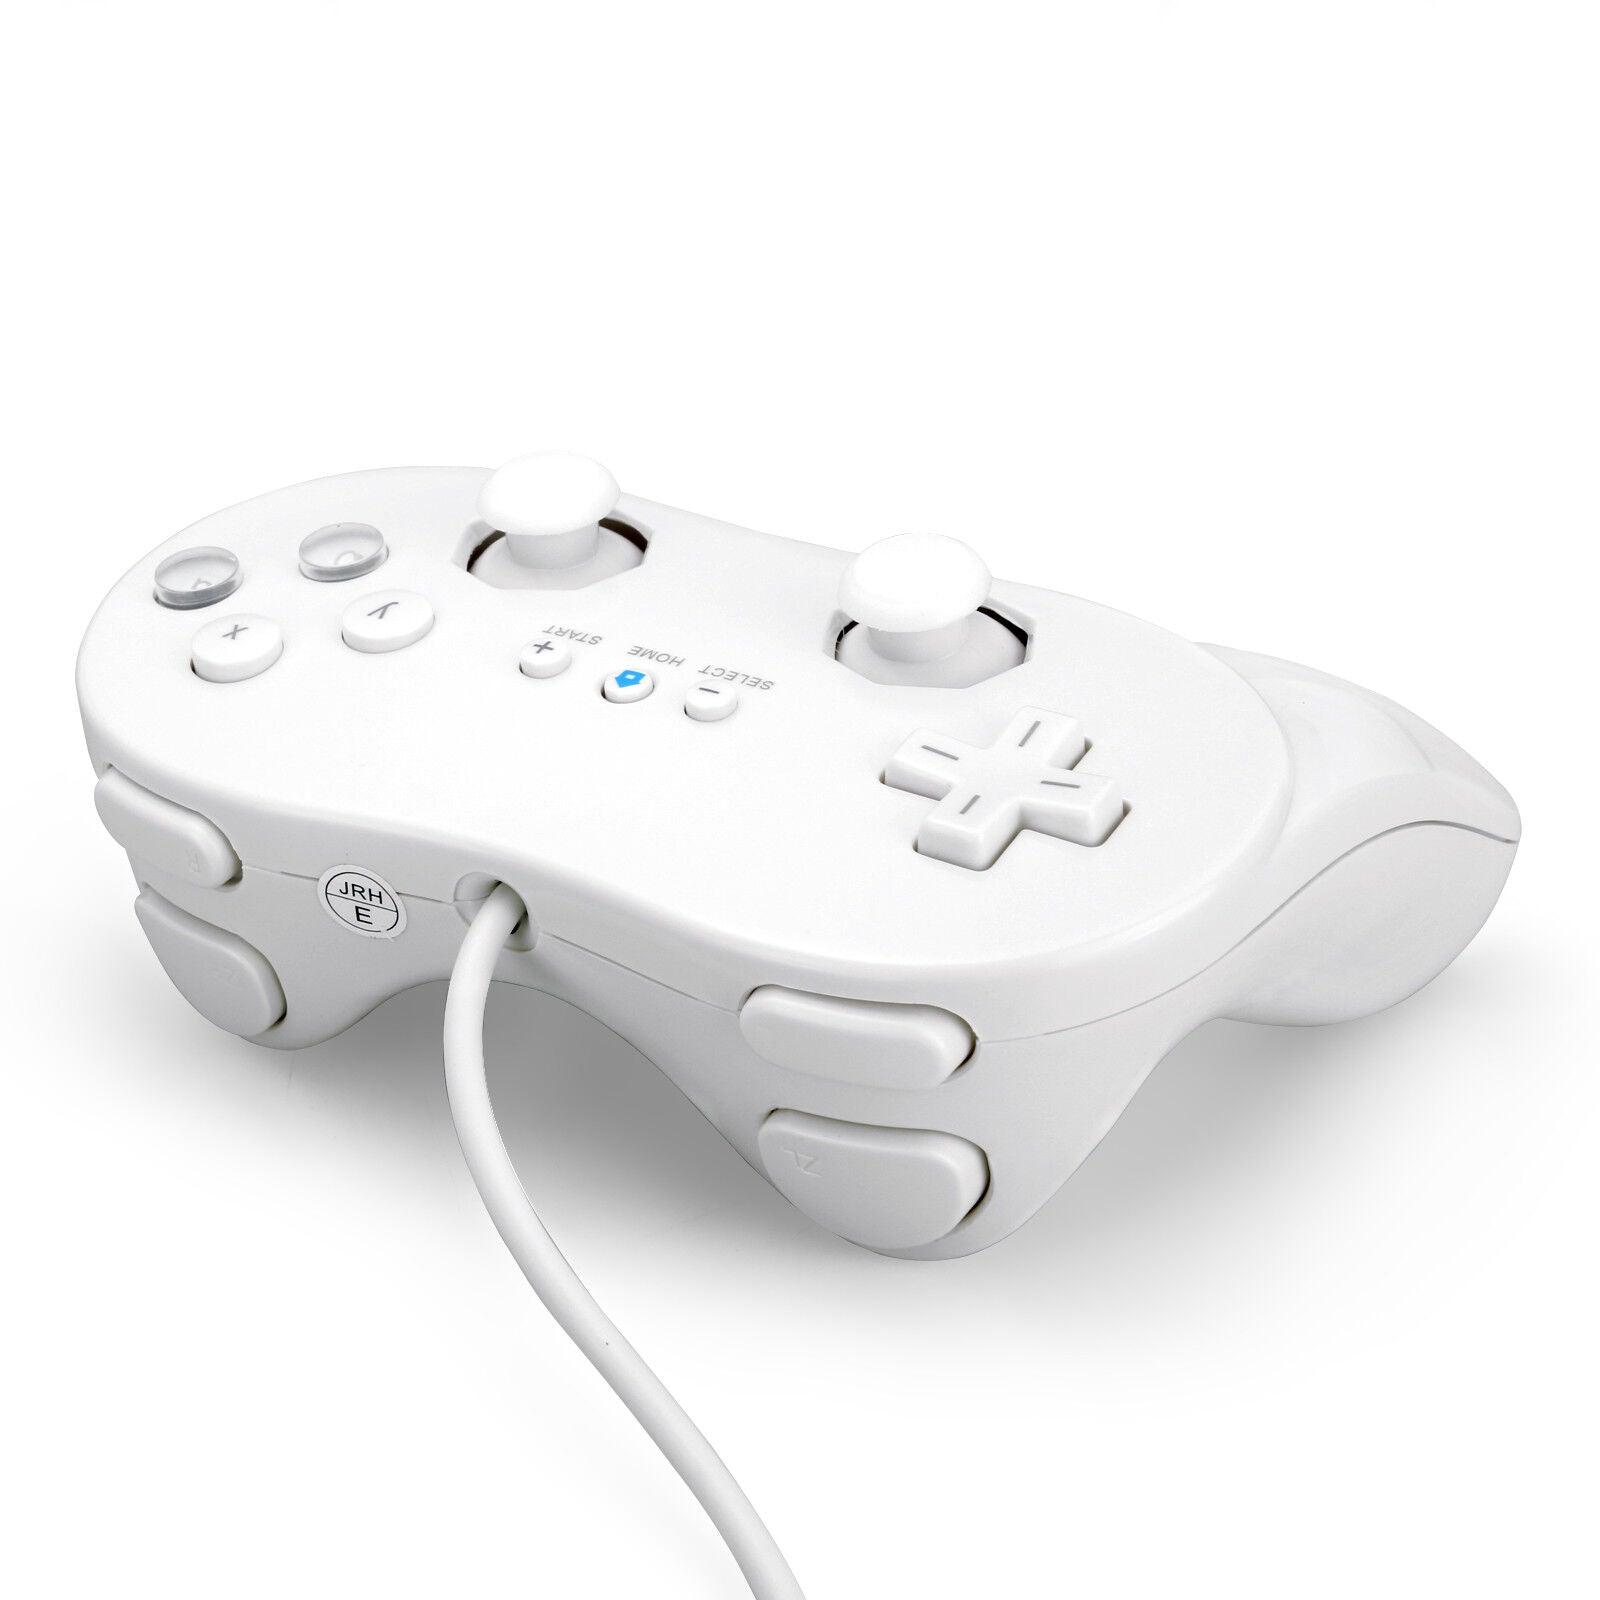 New White Classic Pro Wired GamePad Joypad Controller for Nintendo Wii Console - Office Catch